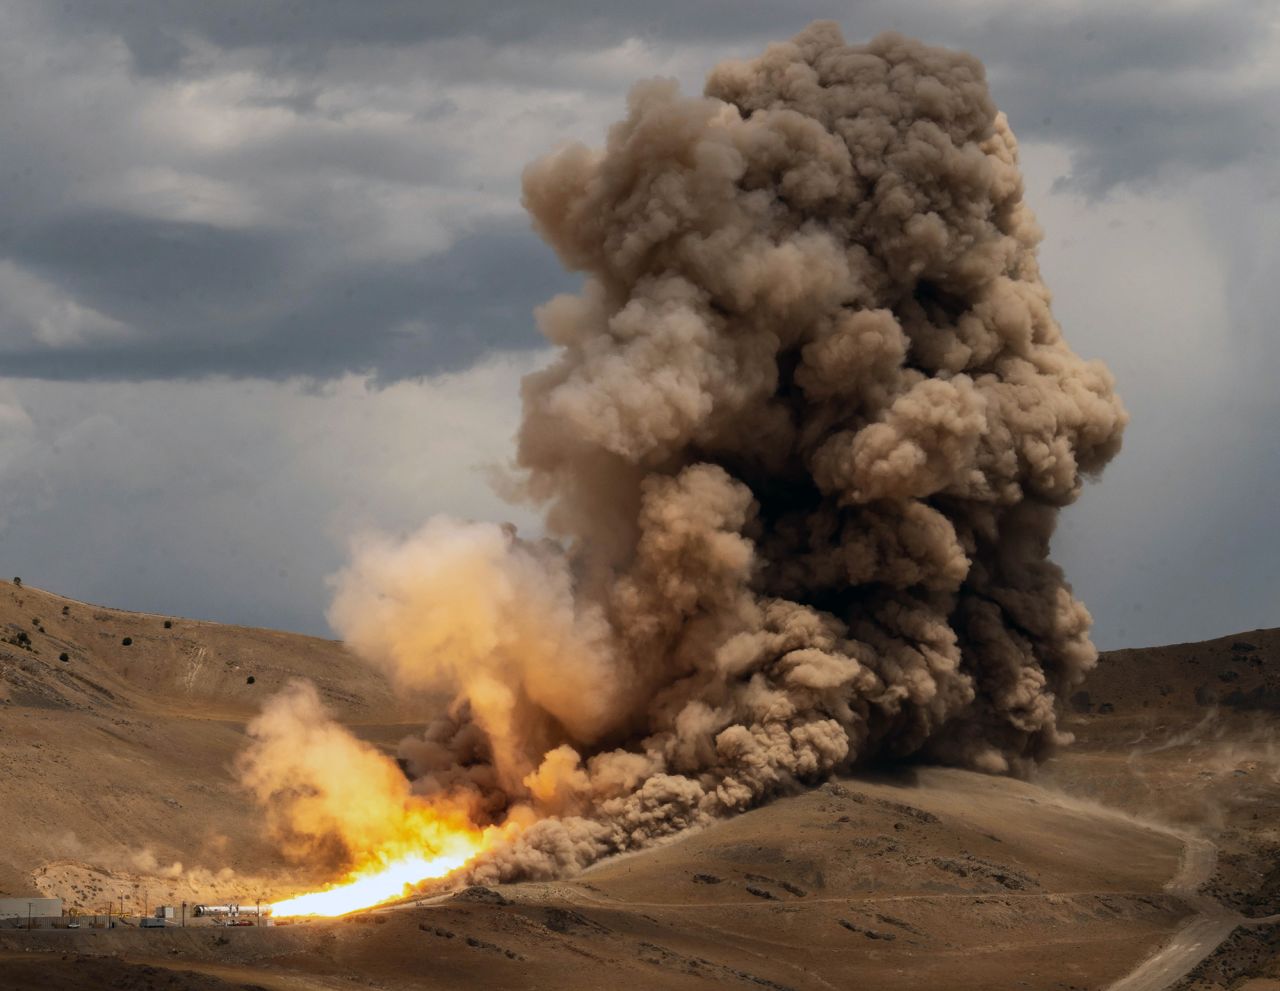 A solid rocket booster motor fires up on July 21 at Northrop Grumman's test facility in Promontory, Utah. The booster motor, positioned horizontally for the ground test, fired for a little over two minutes and produced 3.6 million pounds of thrust, according to NASA.